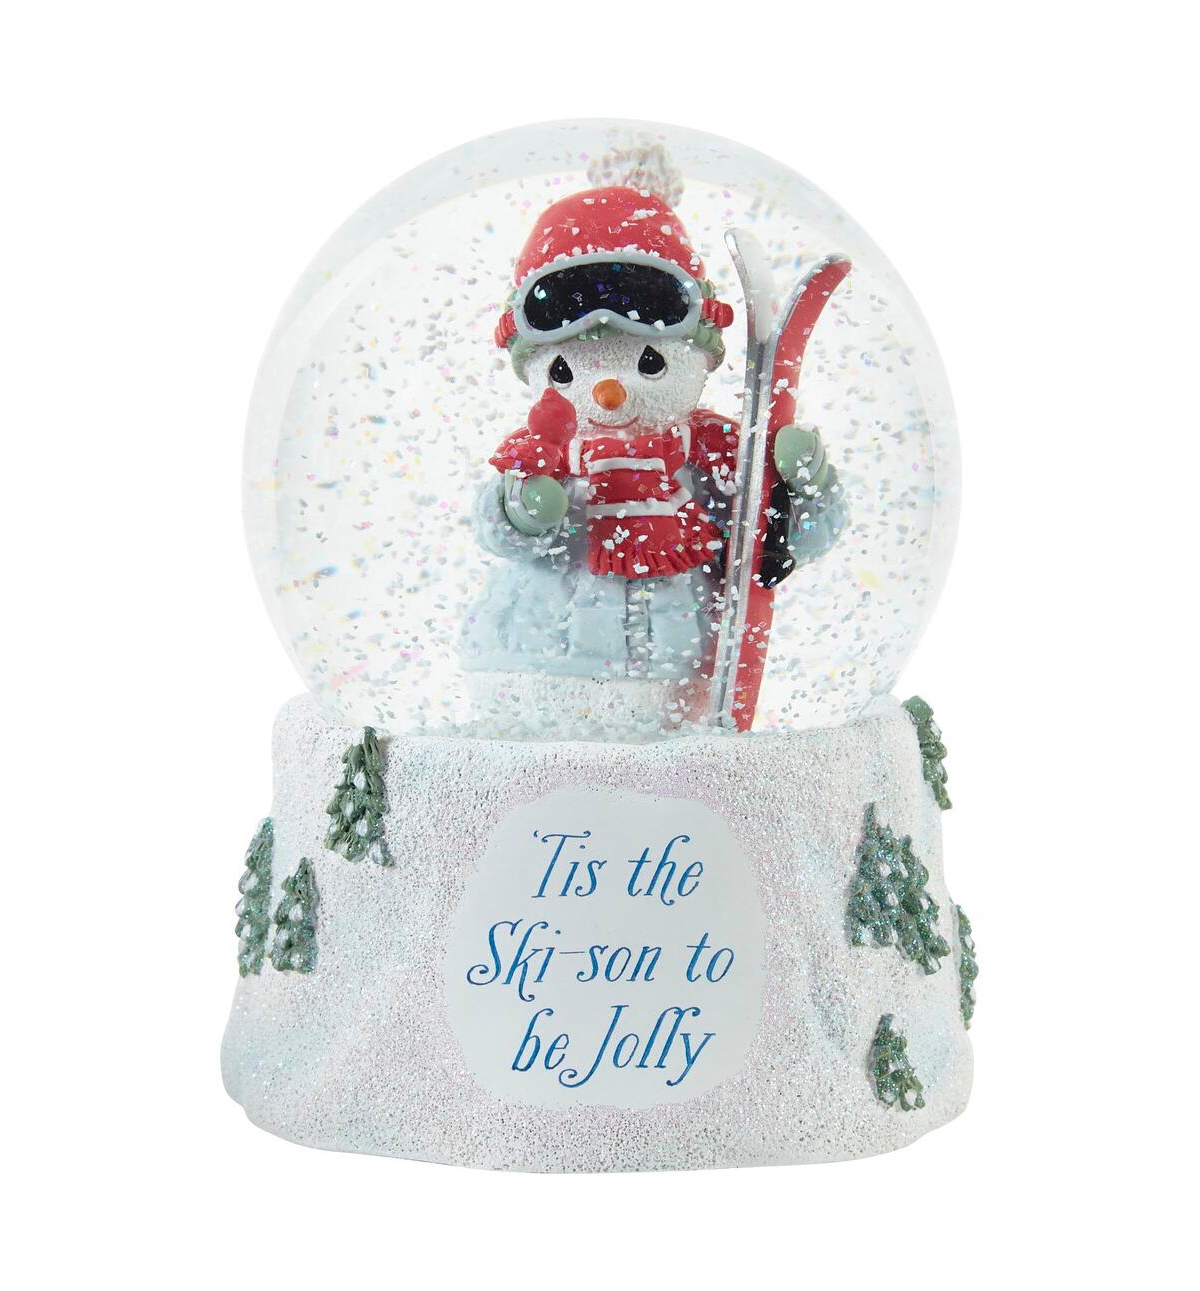 Precious Moments Tis The Ski-son To Be Jolly Annual Snowman Resin, Glass Musical Snow Globe In Multicolored